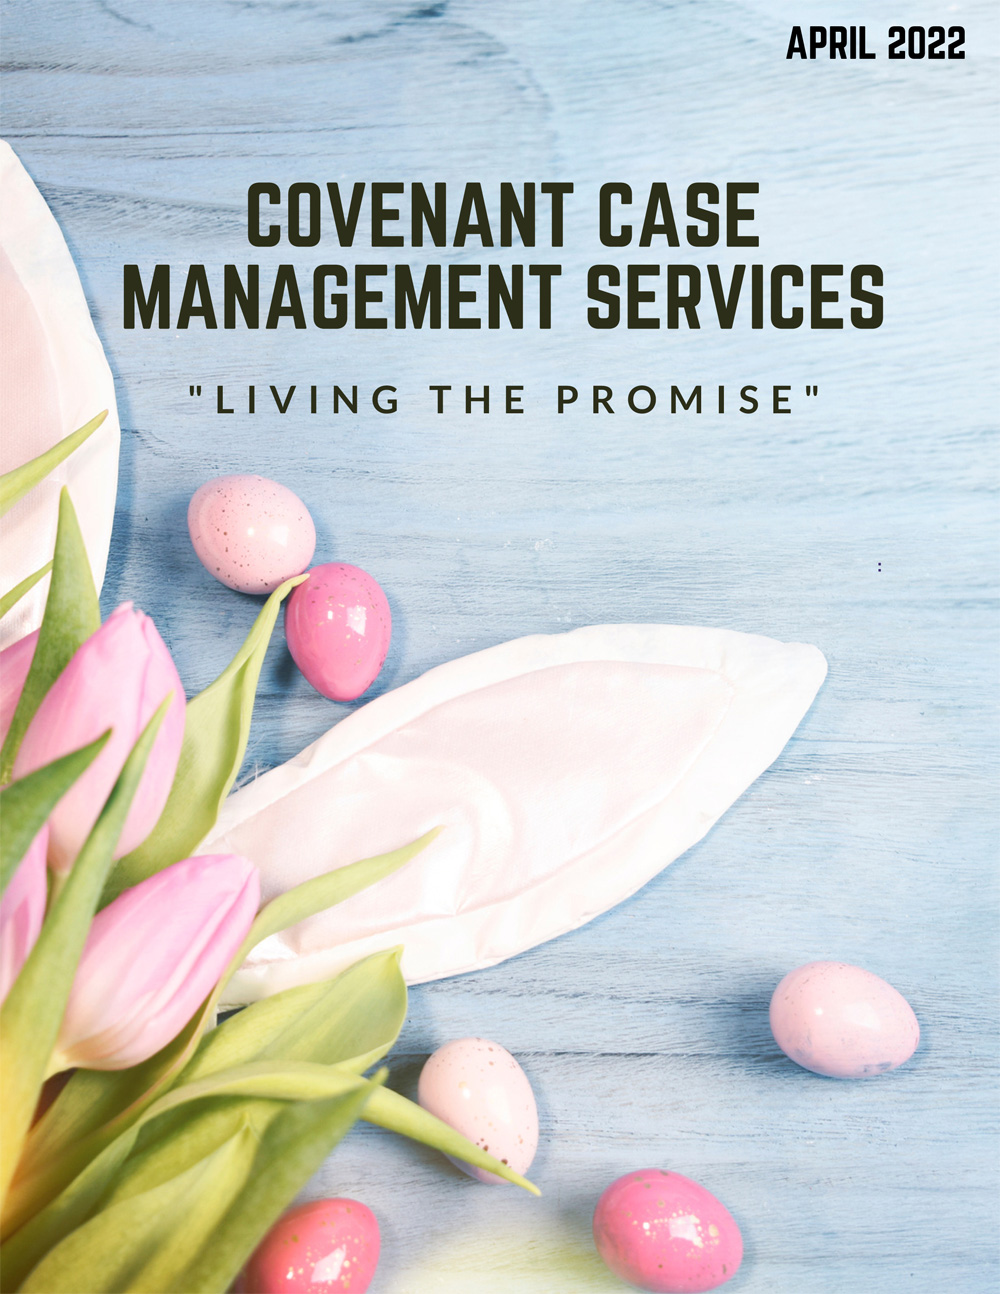 April 2022 Newsletter from Covenant Case Management Services